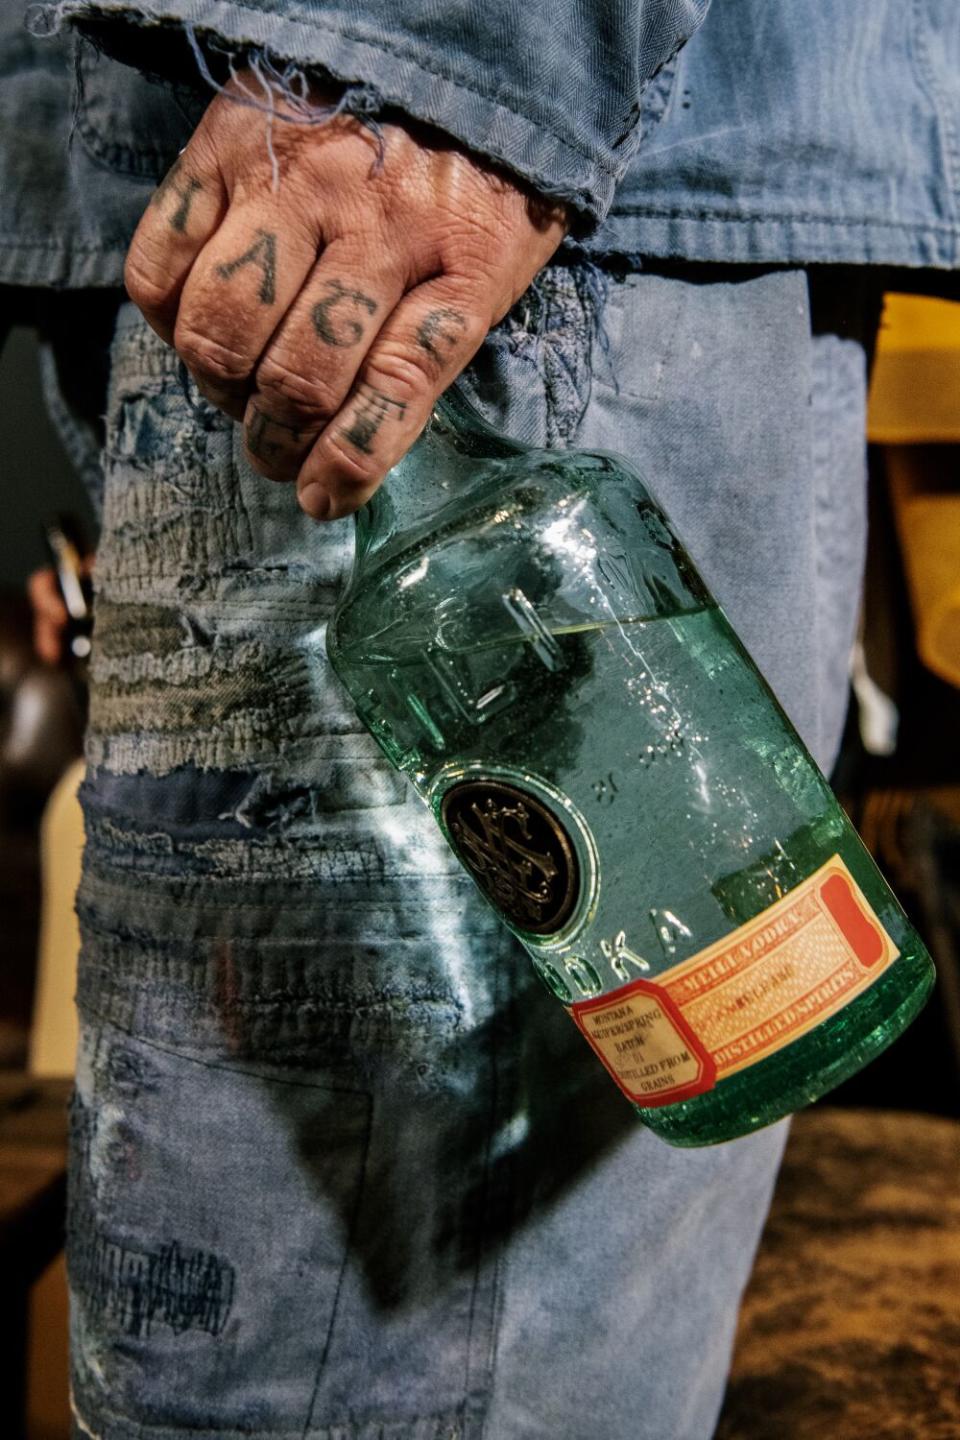 A man's tattooed hand holding a bottle of vodka